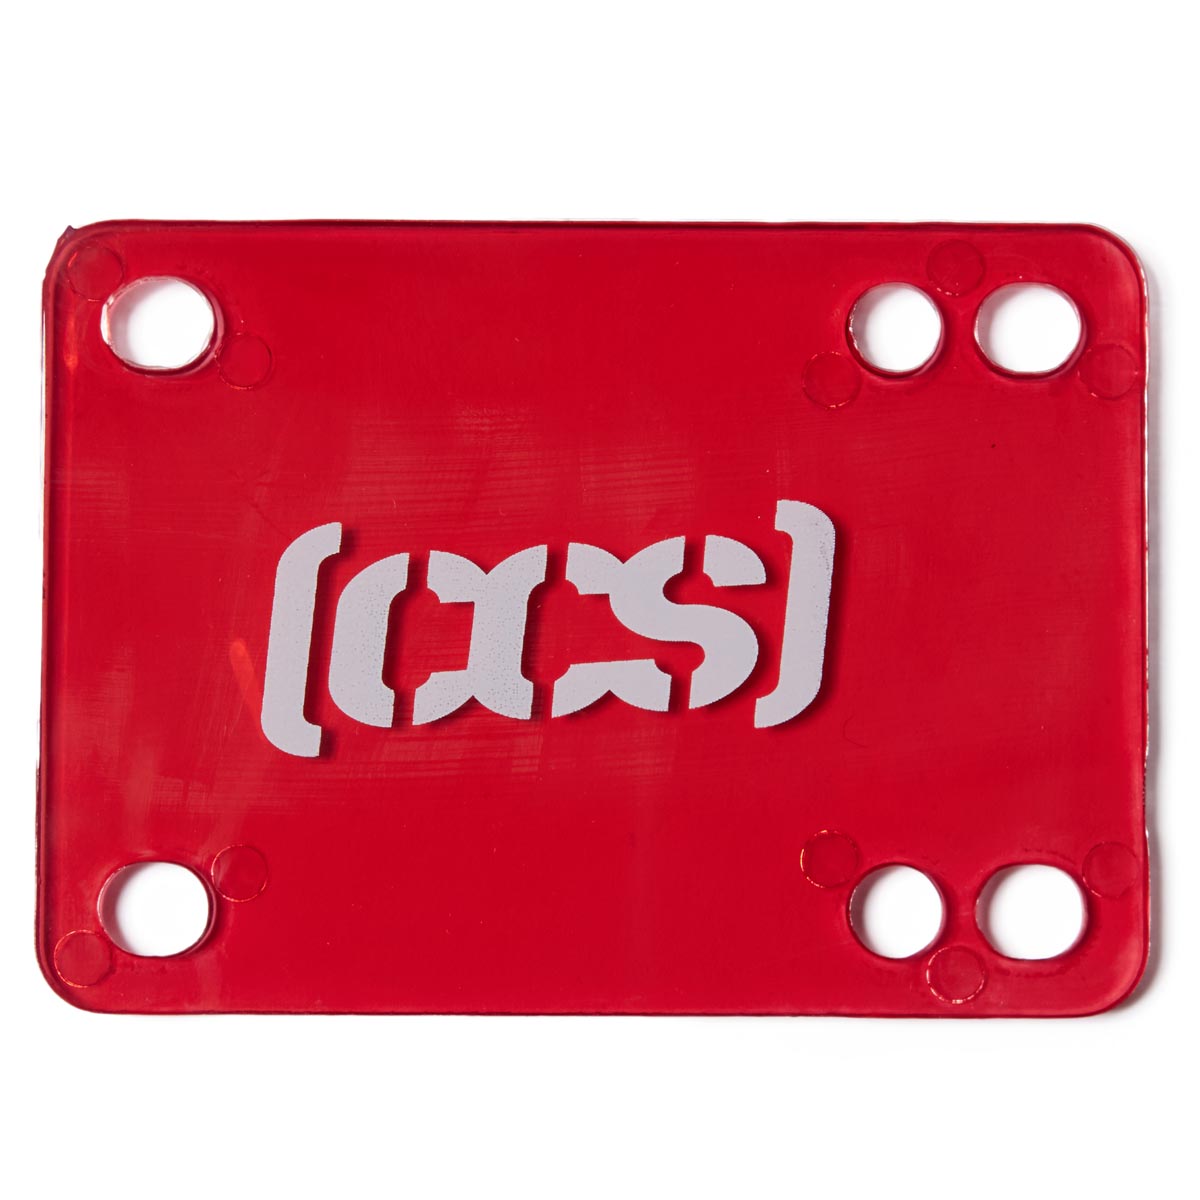 CCS Clear Skateboard Riser Pads - Red image 2